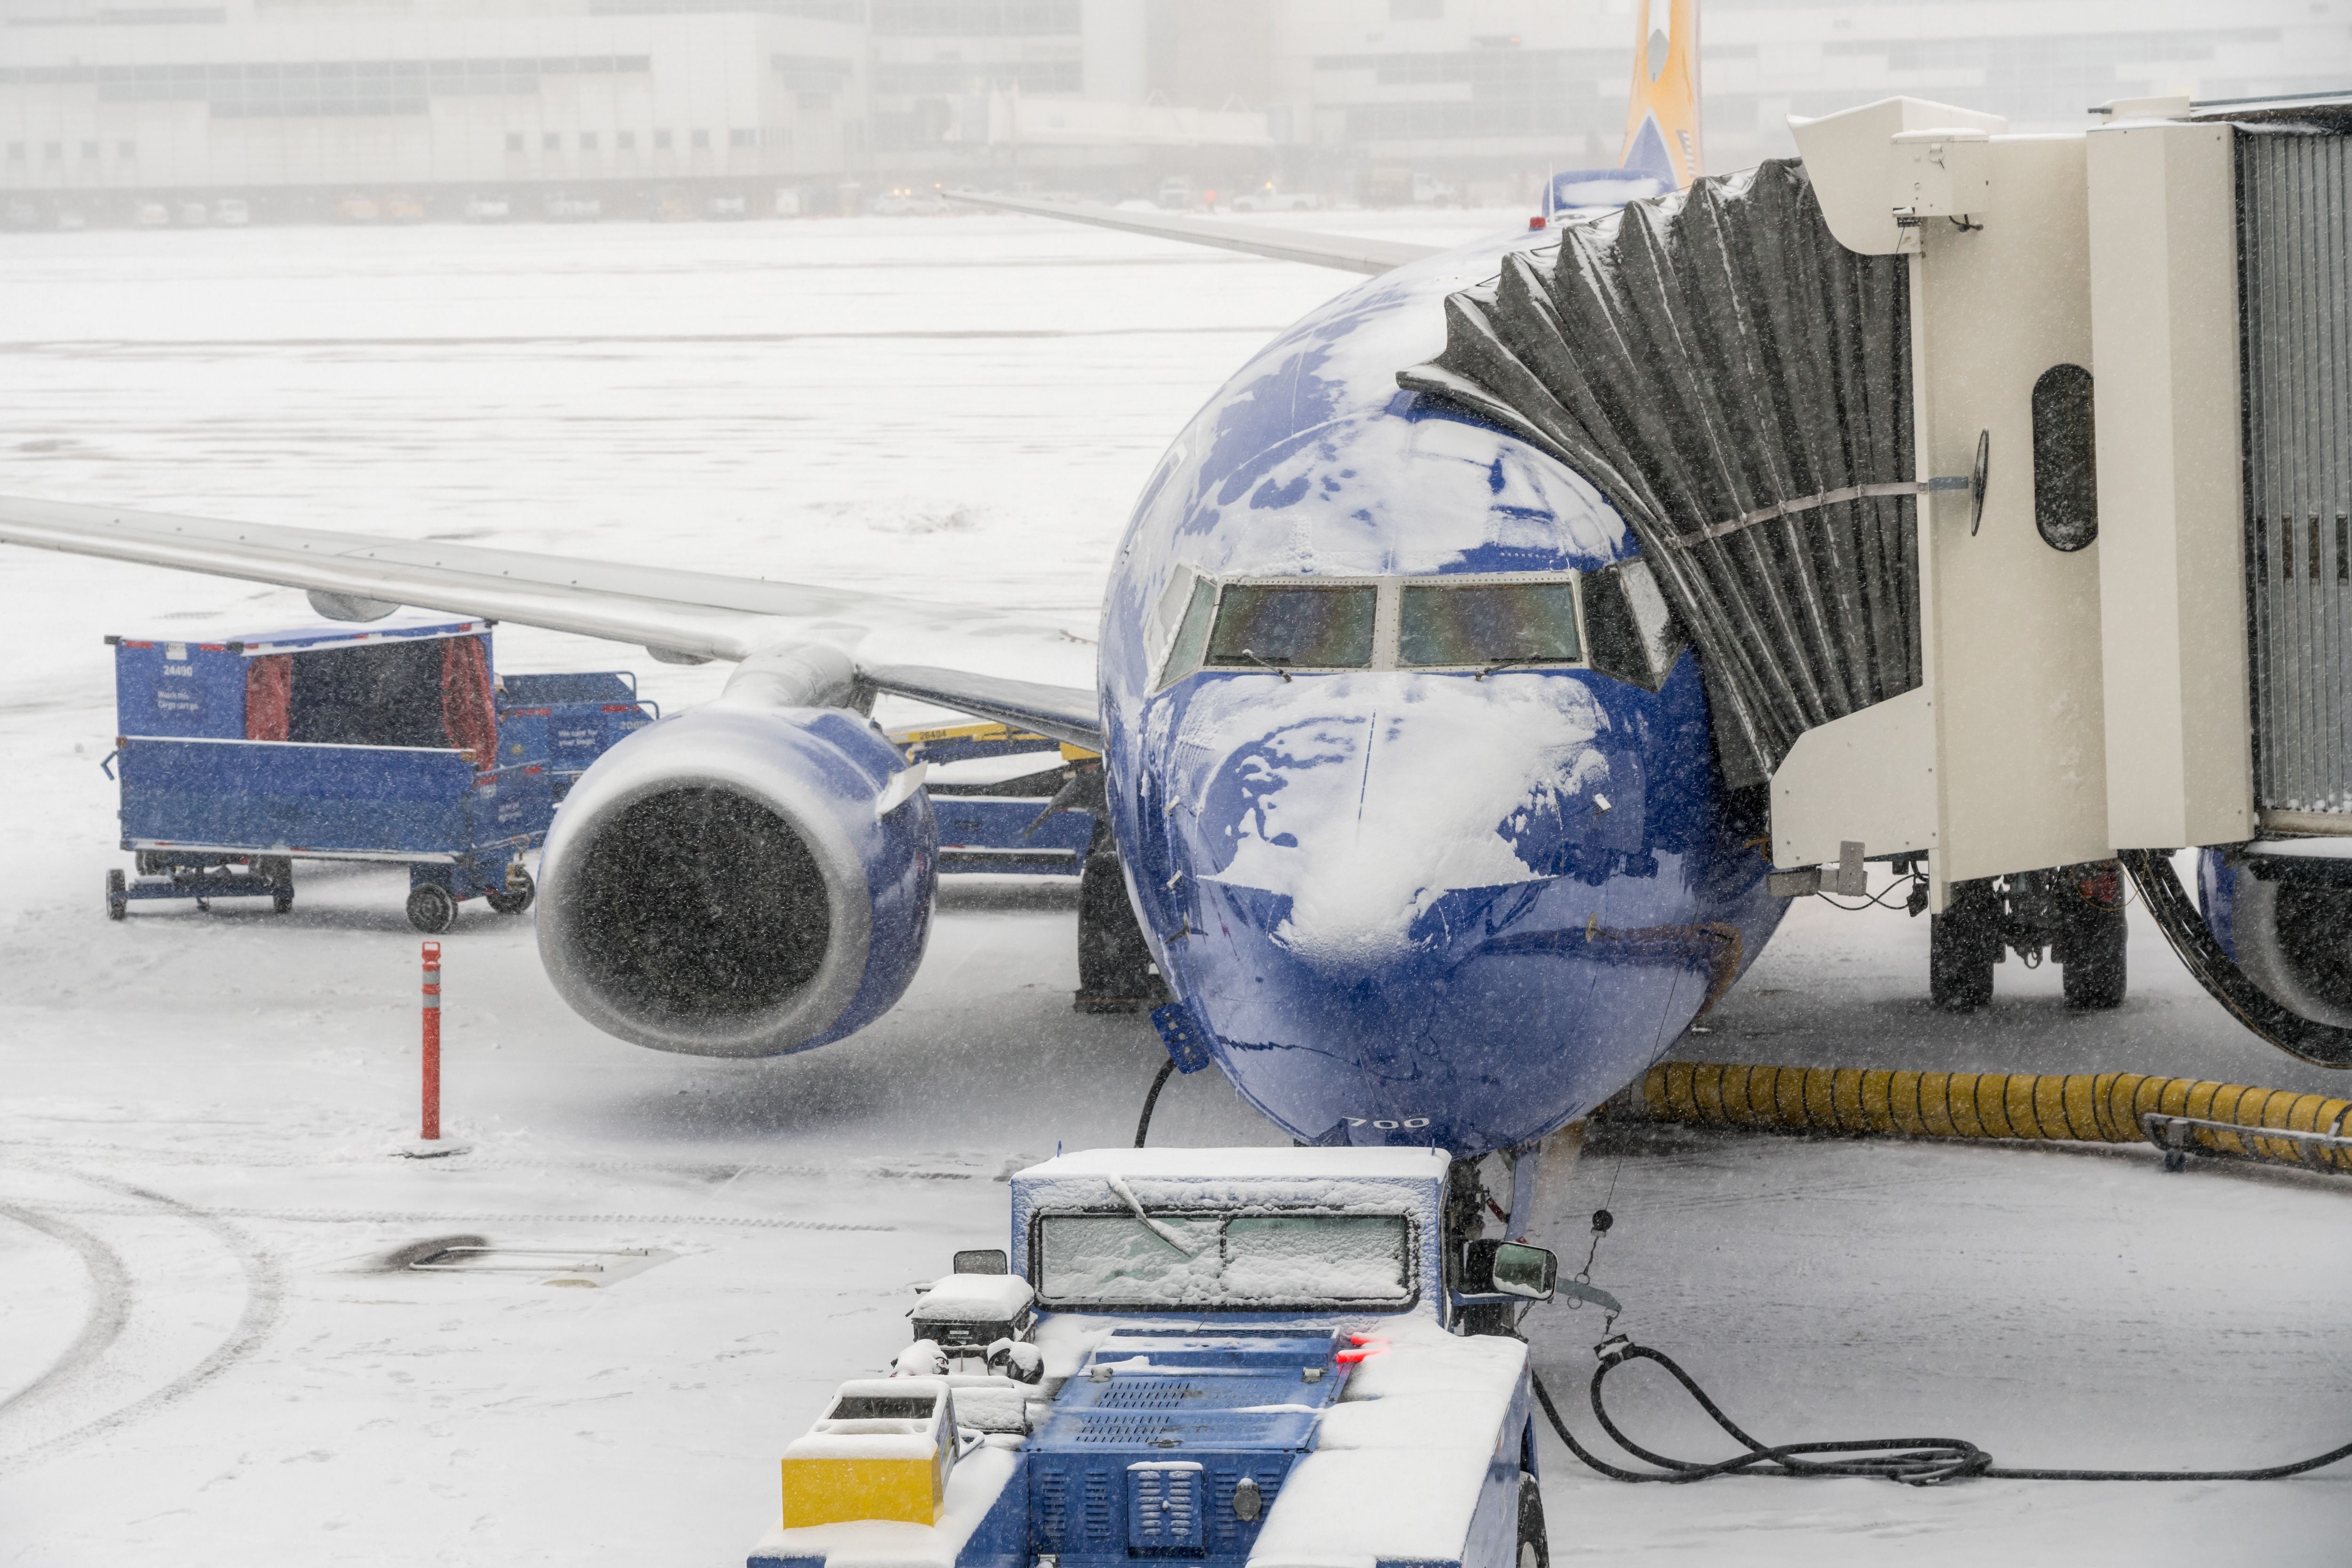 Southwest Airlines Boeing 737 in the snow at DEN